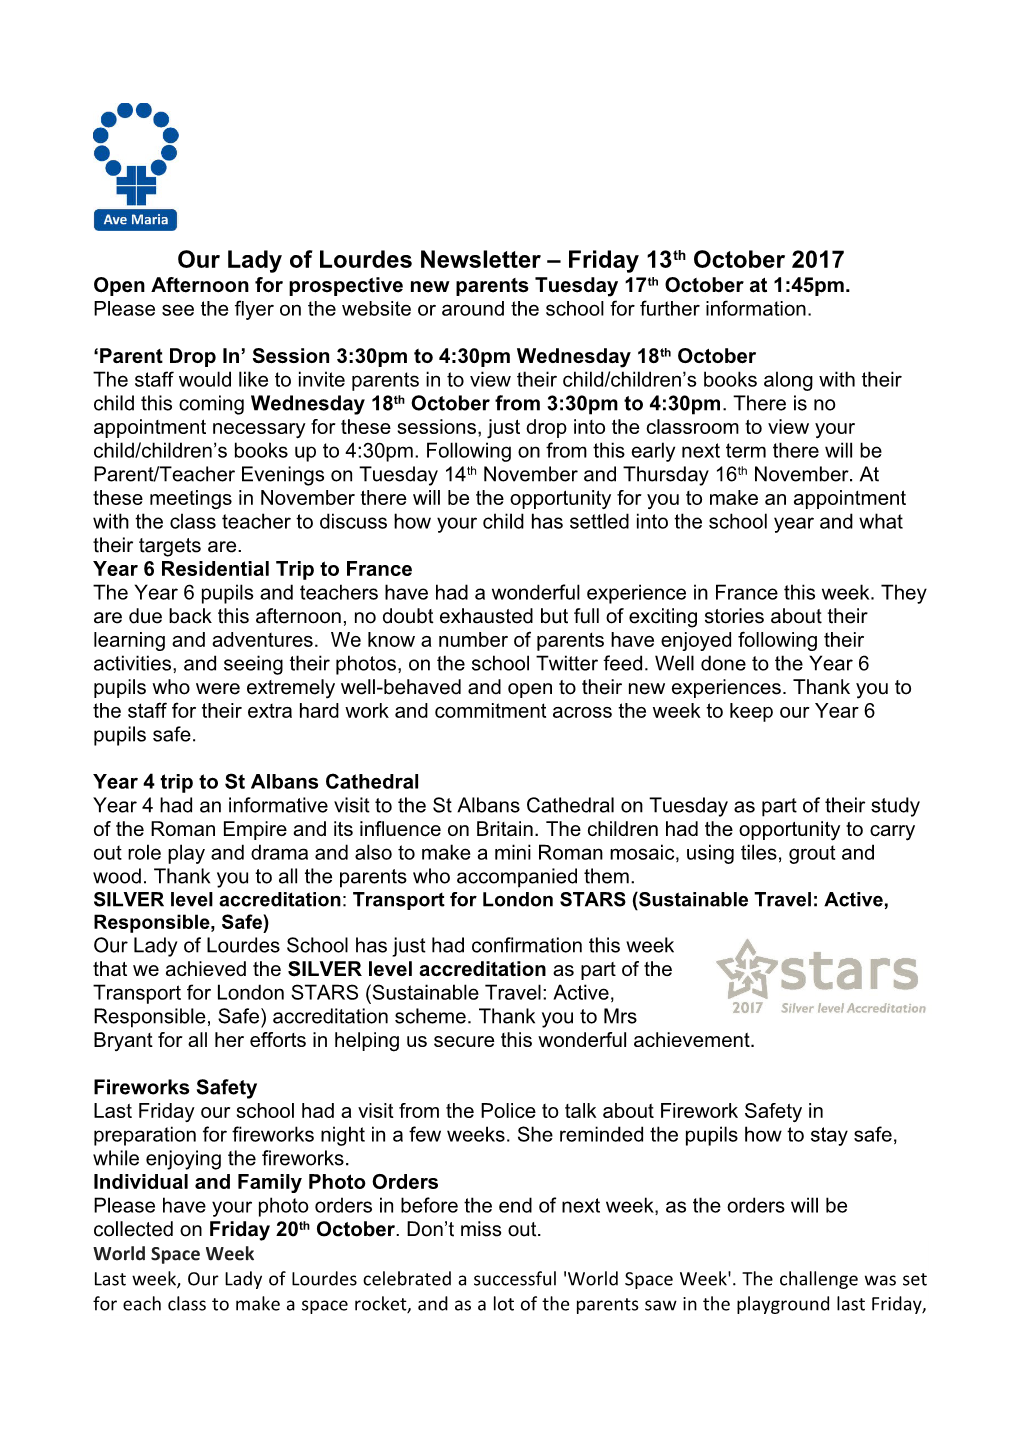 Our Lady of Lourdes Newsletter Friday 13Th October 2017